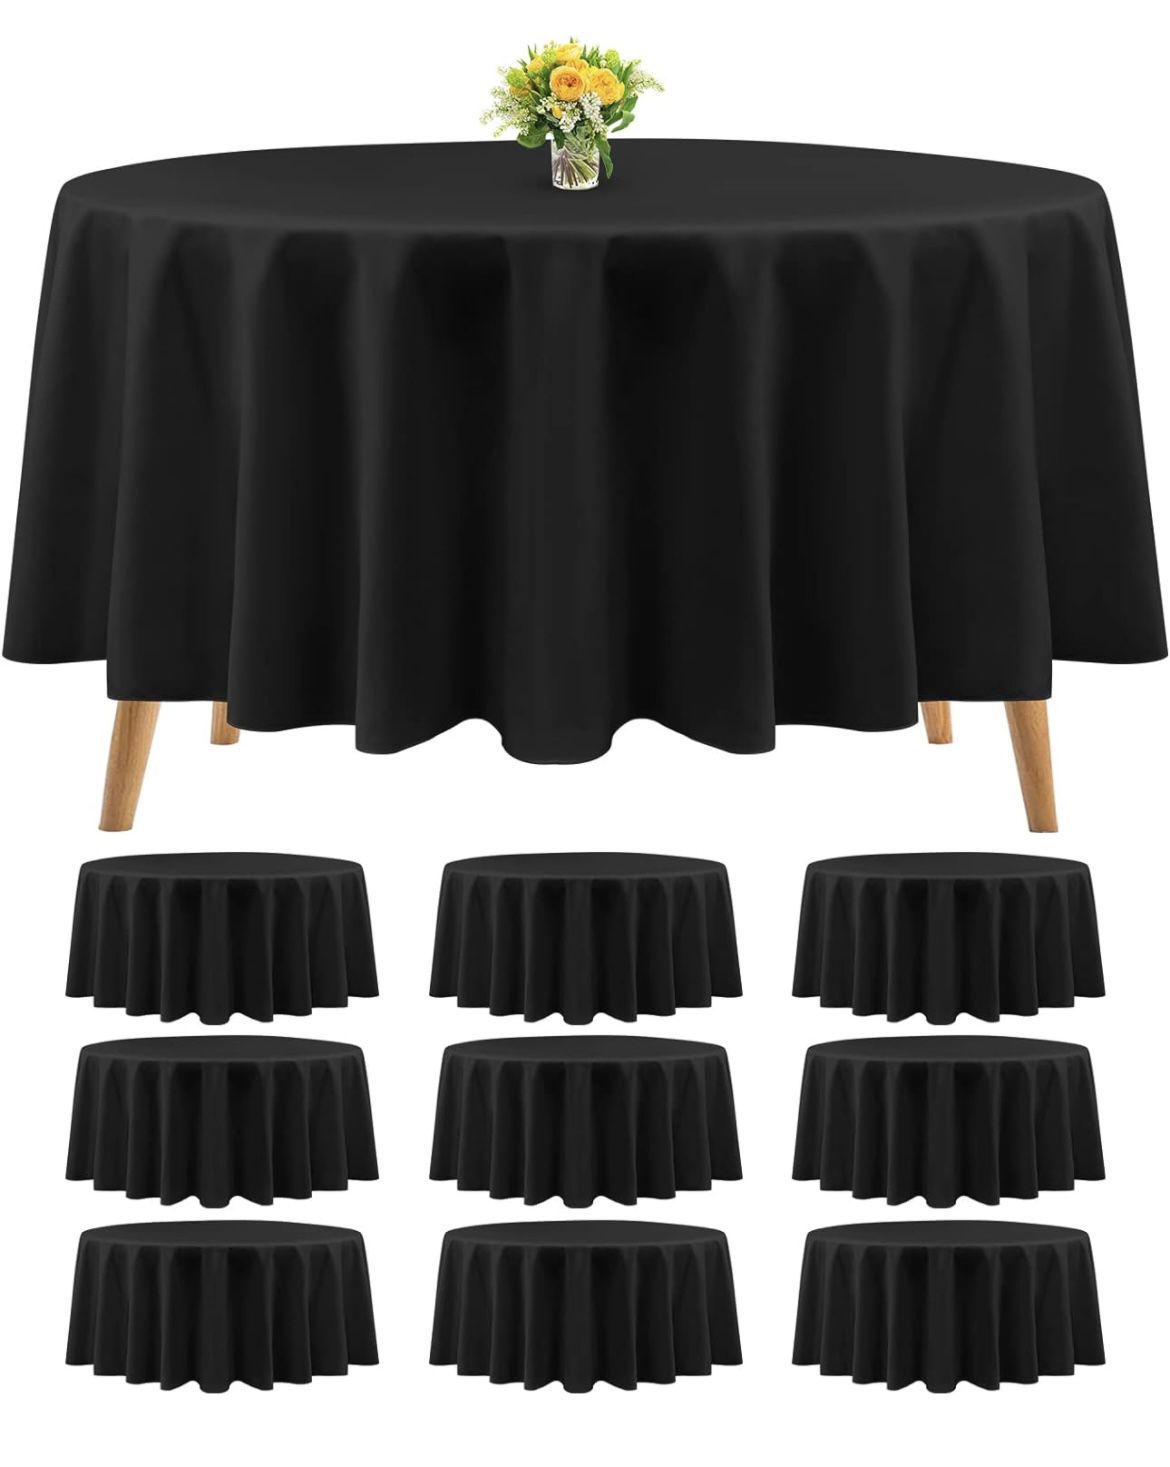 10 Packs Premium Round Tablecloth 90 Inch Black Polyester Table Cloth Bulk Washable Polyester Fabric Tablecloths Table Cover for Wedding Party Banquet